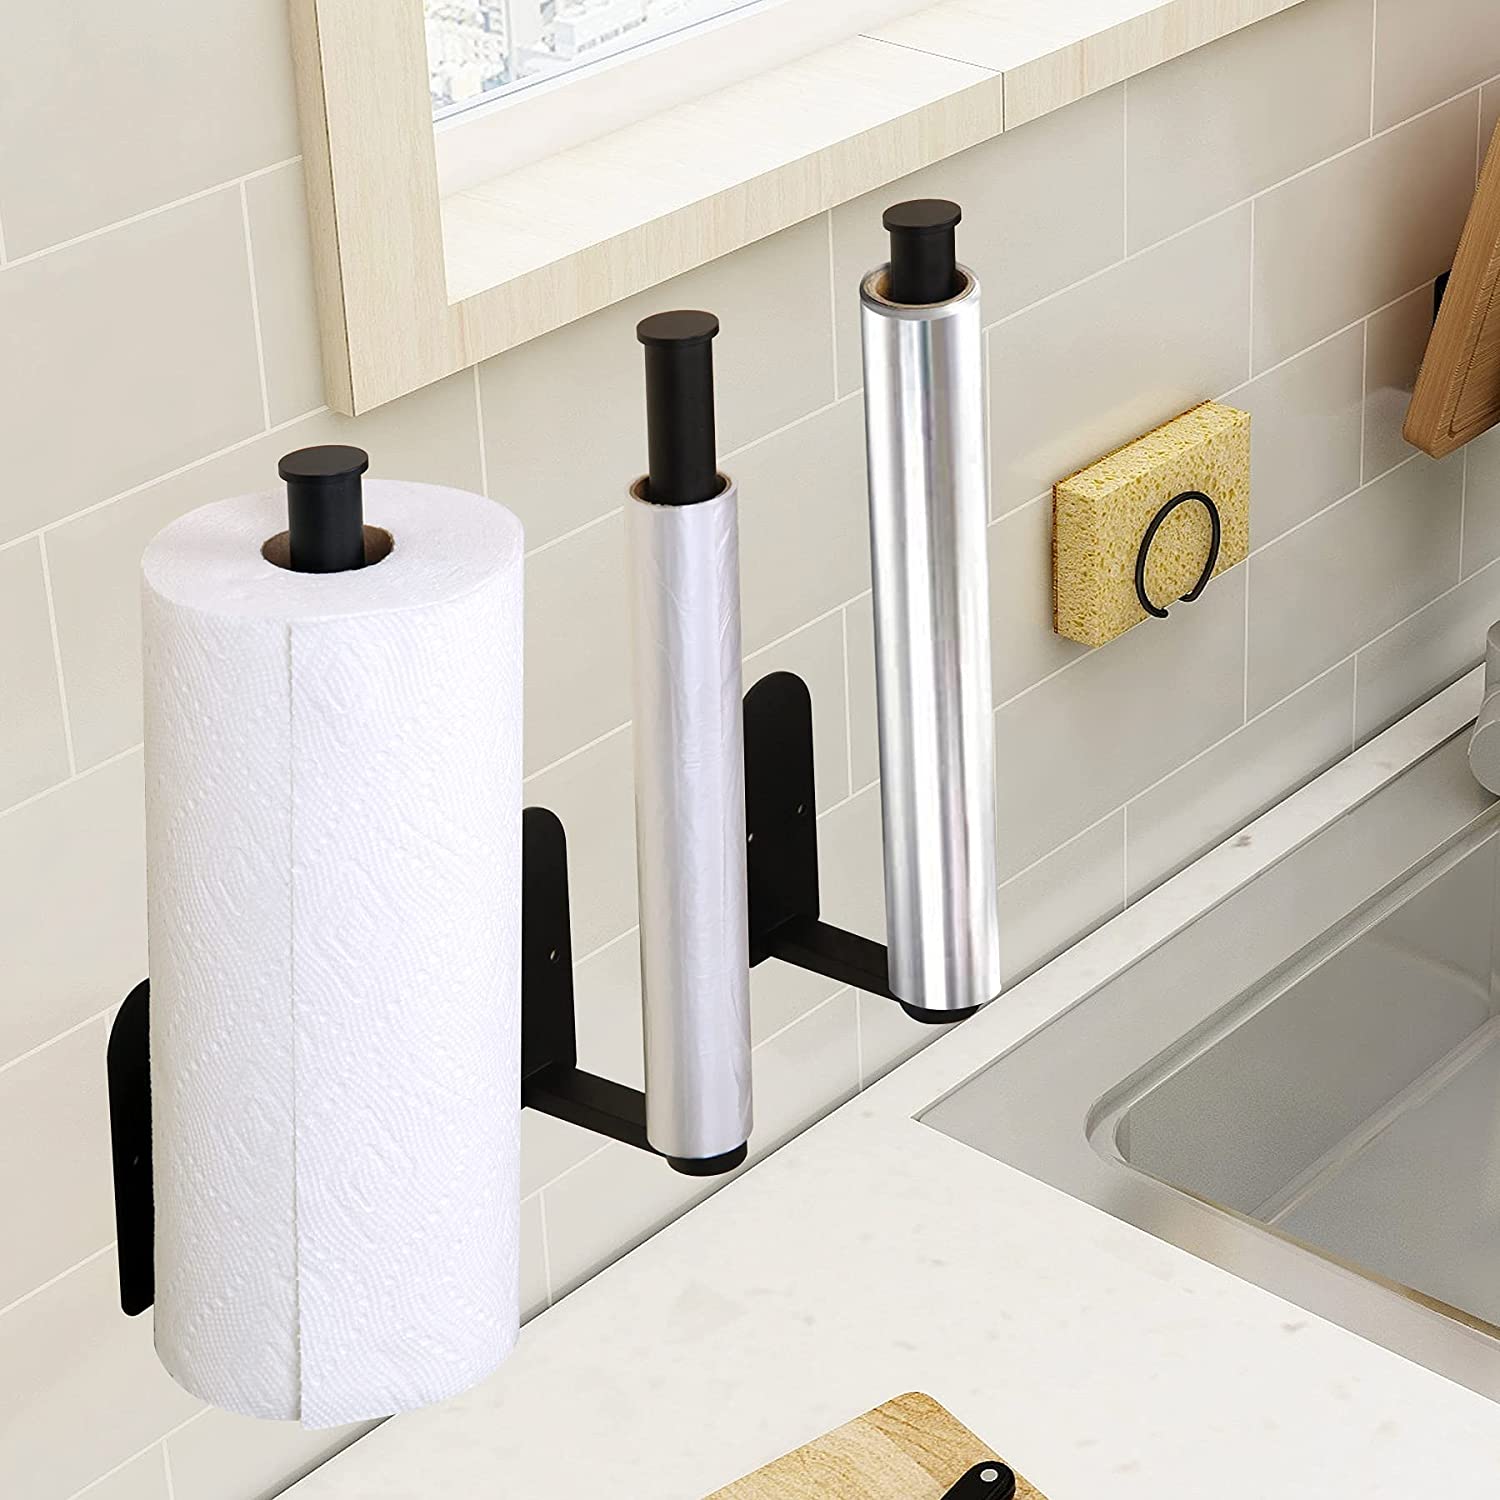 OBODING Black Wall Mount Self Adhesive Paper Towel Holder, 12inch Kitchen Towel Holder for Under Cabinet Organization and Storage (1 Pack) 5